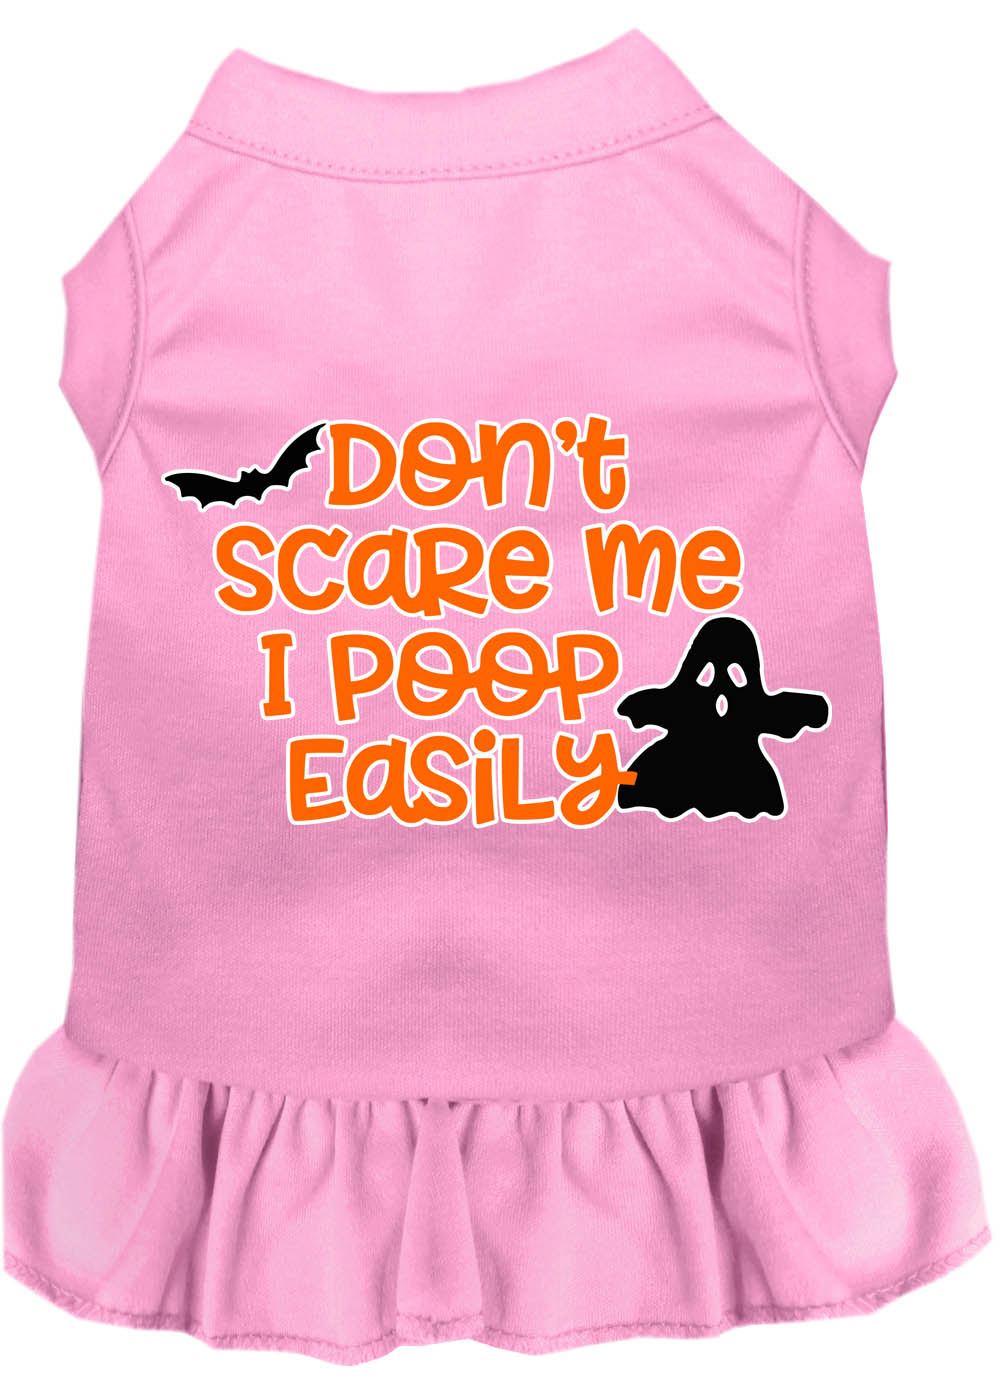 Don't Scare Me, Poops Easily Screen Print Dog Dress Light Pink 4X